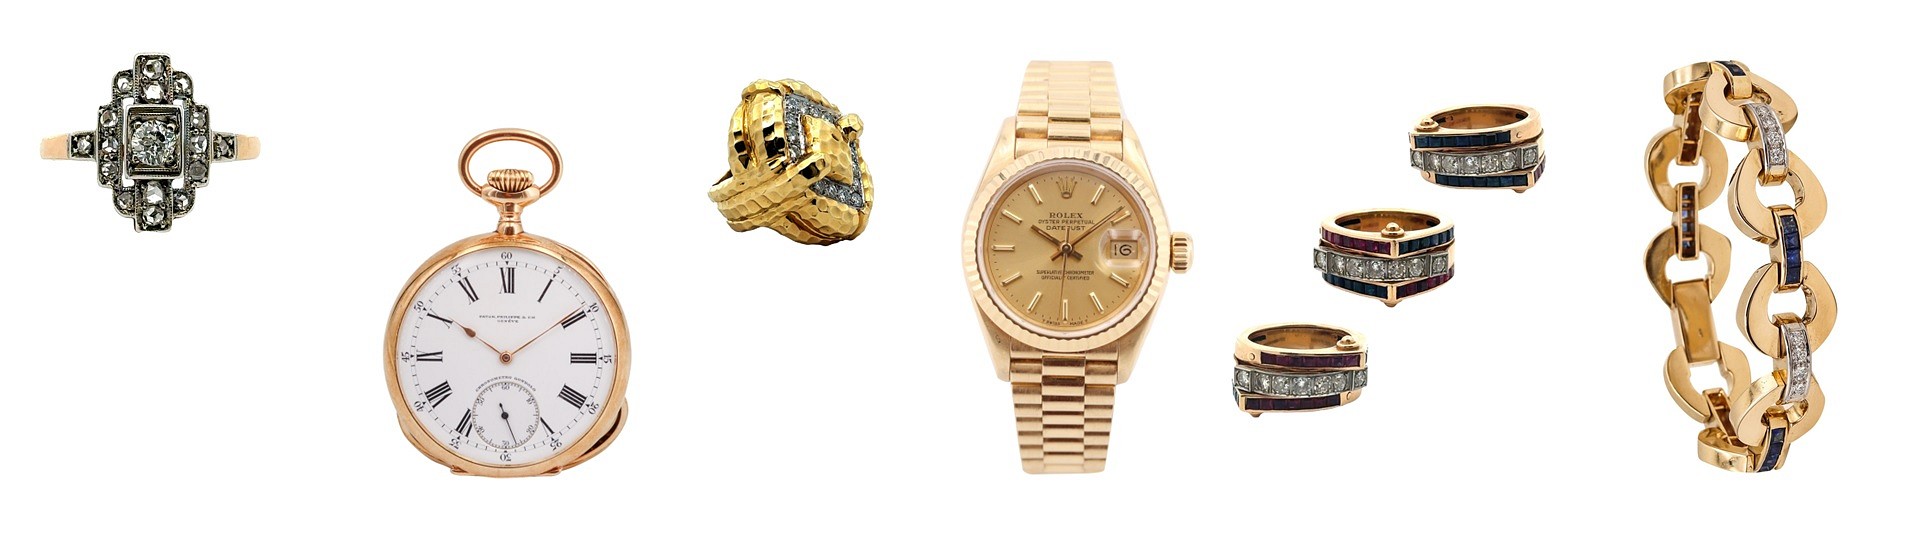 Summer Jewelry & Watches Collection by WinBids Auctions